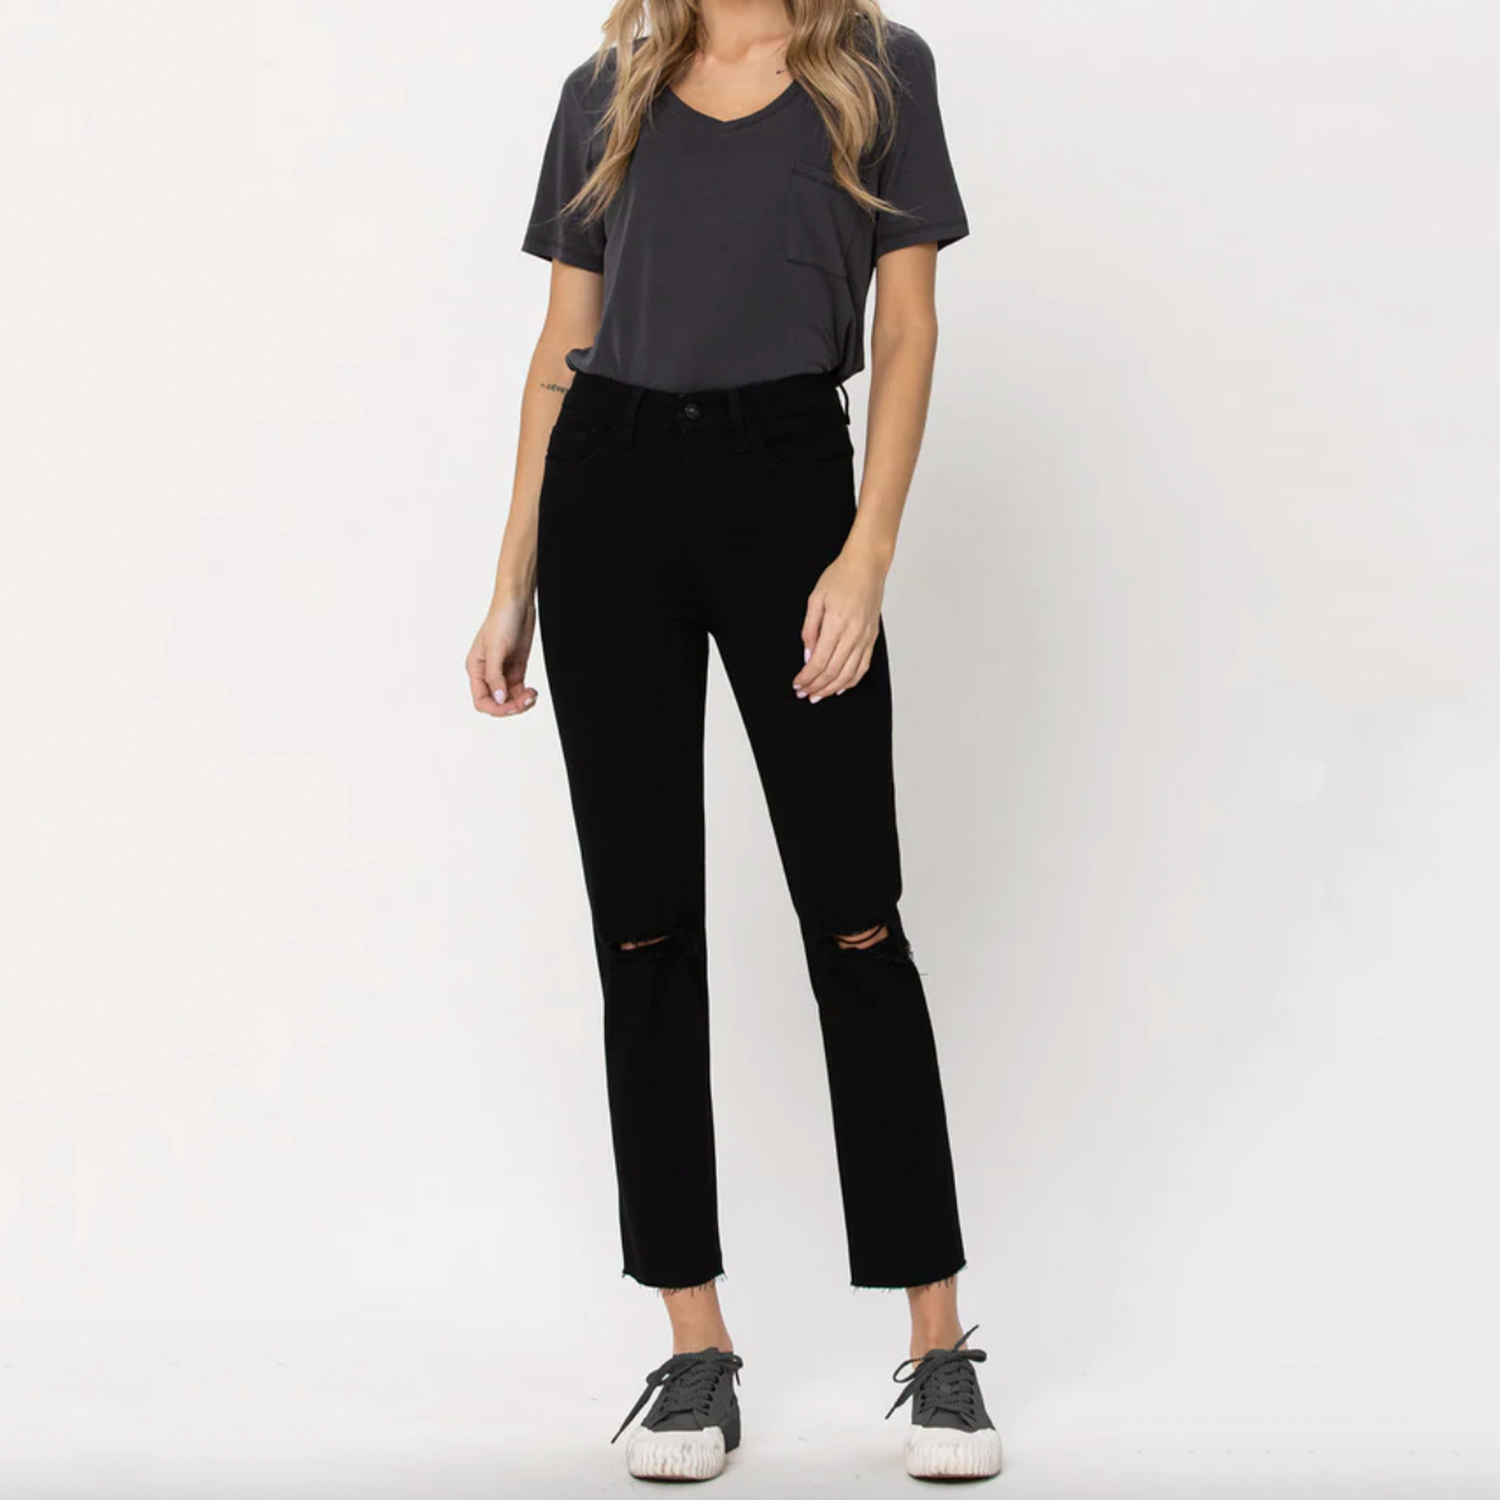 Vervet High Rise Raw Hem Straight Jean. Sporting a classic 5-pocket style and exposed button closure, this black denim number rocks tattered details throughout to match exposed, knee grinding. Cropped, raw hem at ankle baring length pairs perfectly with some sneakers to complete the look